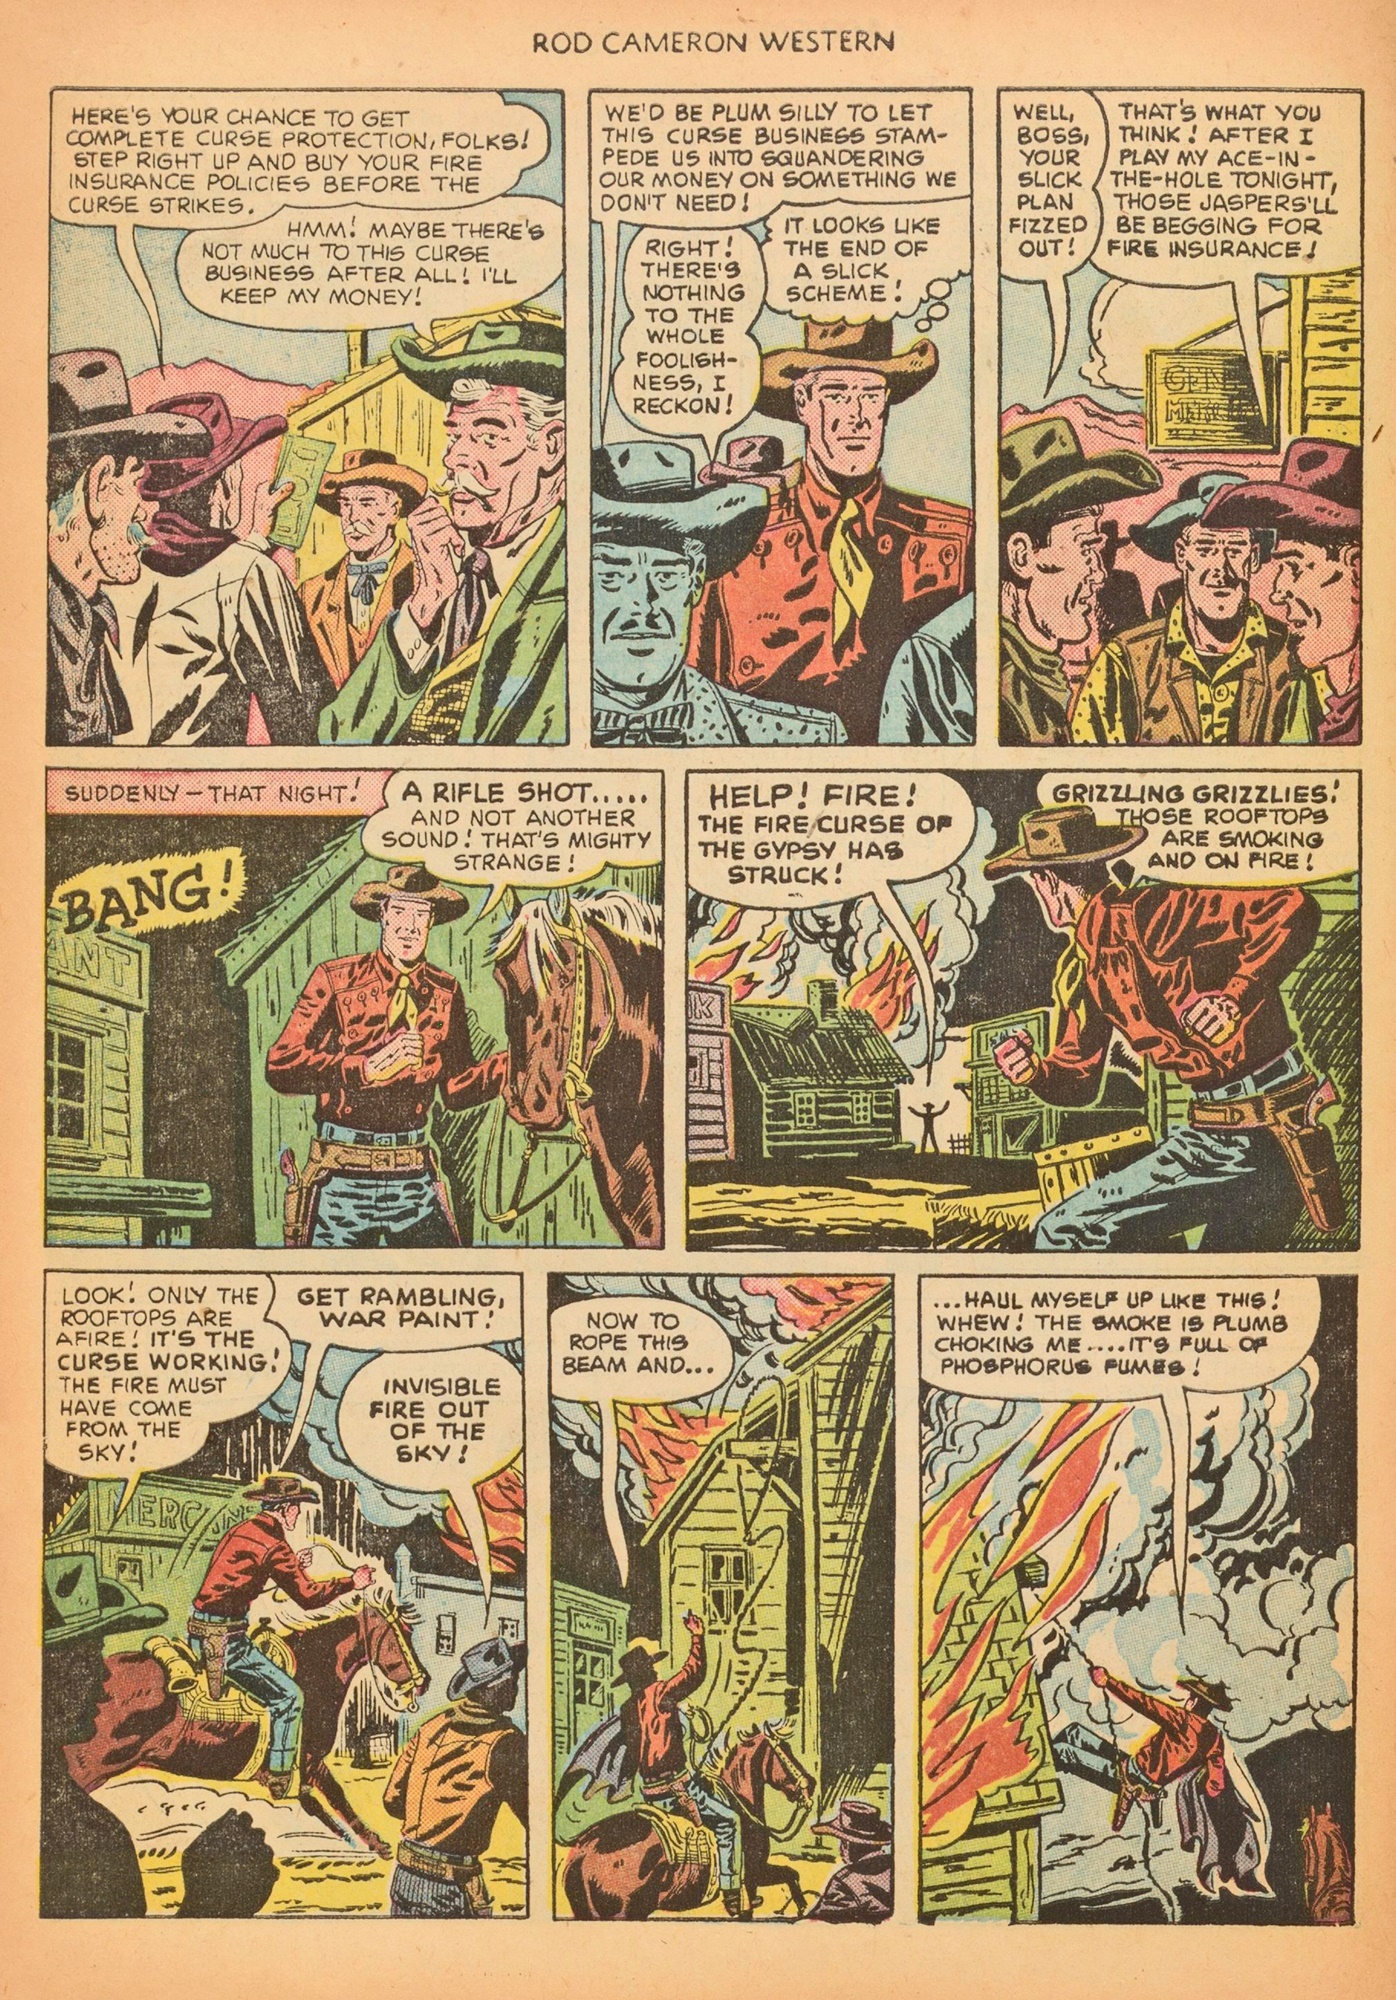 Read online Rod Cameron Western comic -  Issue #9 - 10